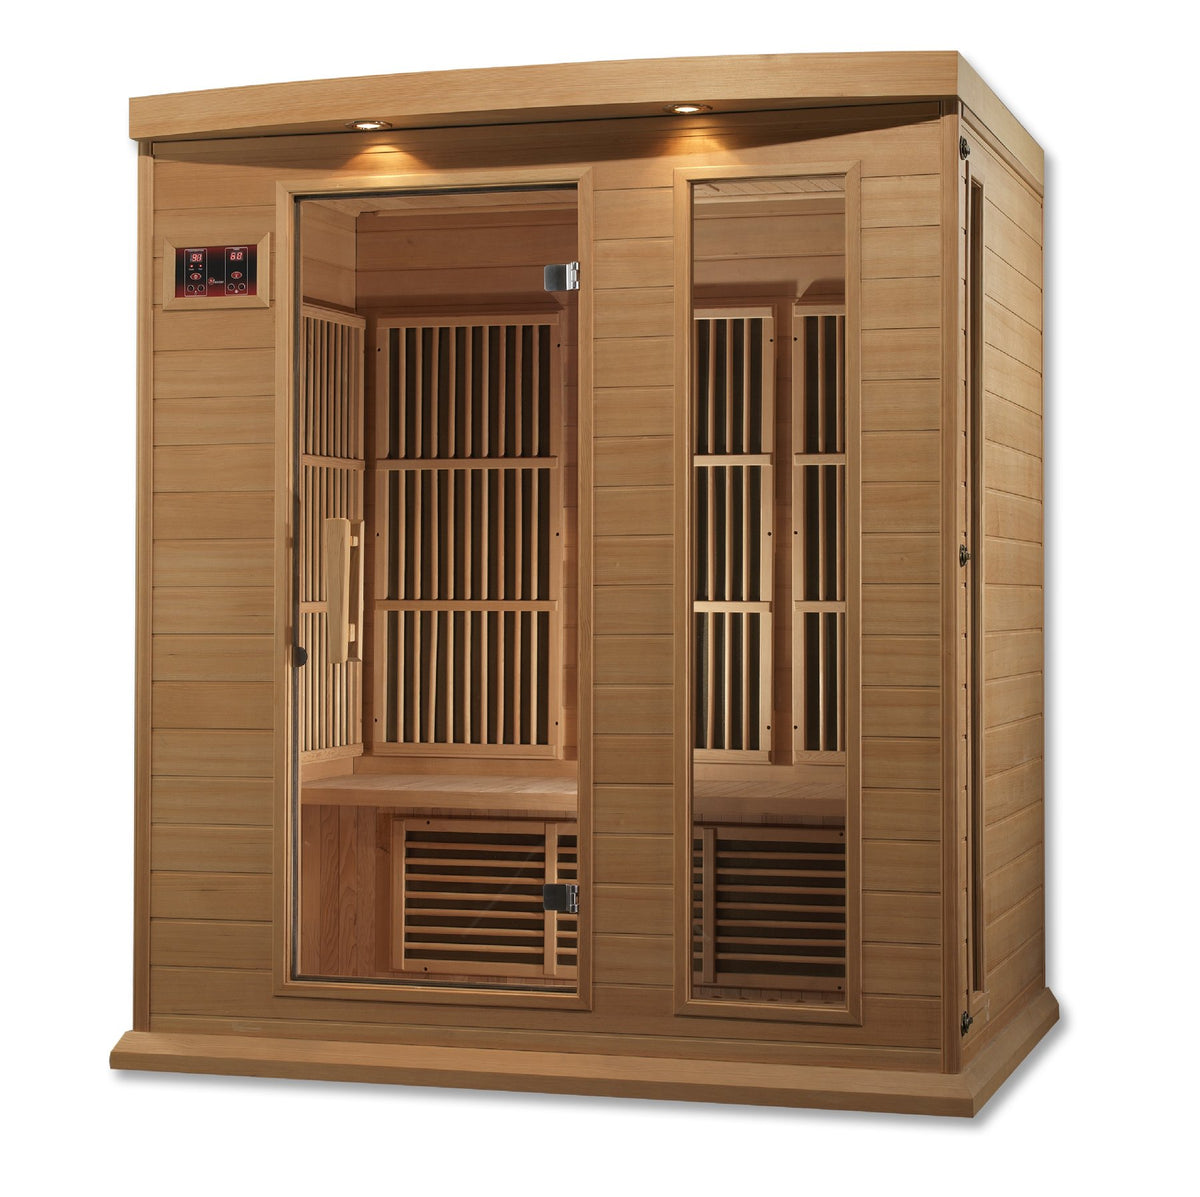 Maxxus 3 Person Low EMF Infrared Sauna - Promo Code "calmspas50" for $50 Off / Ships in July